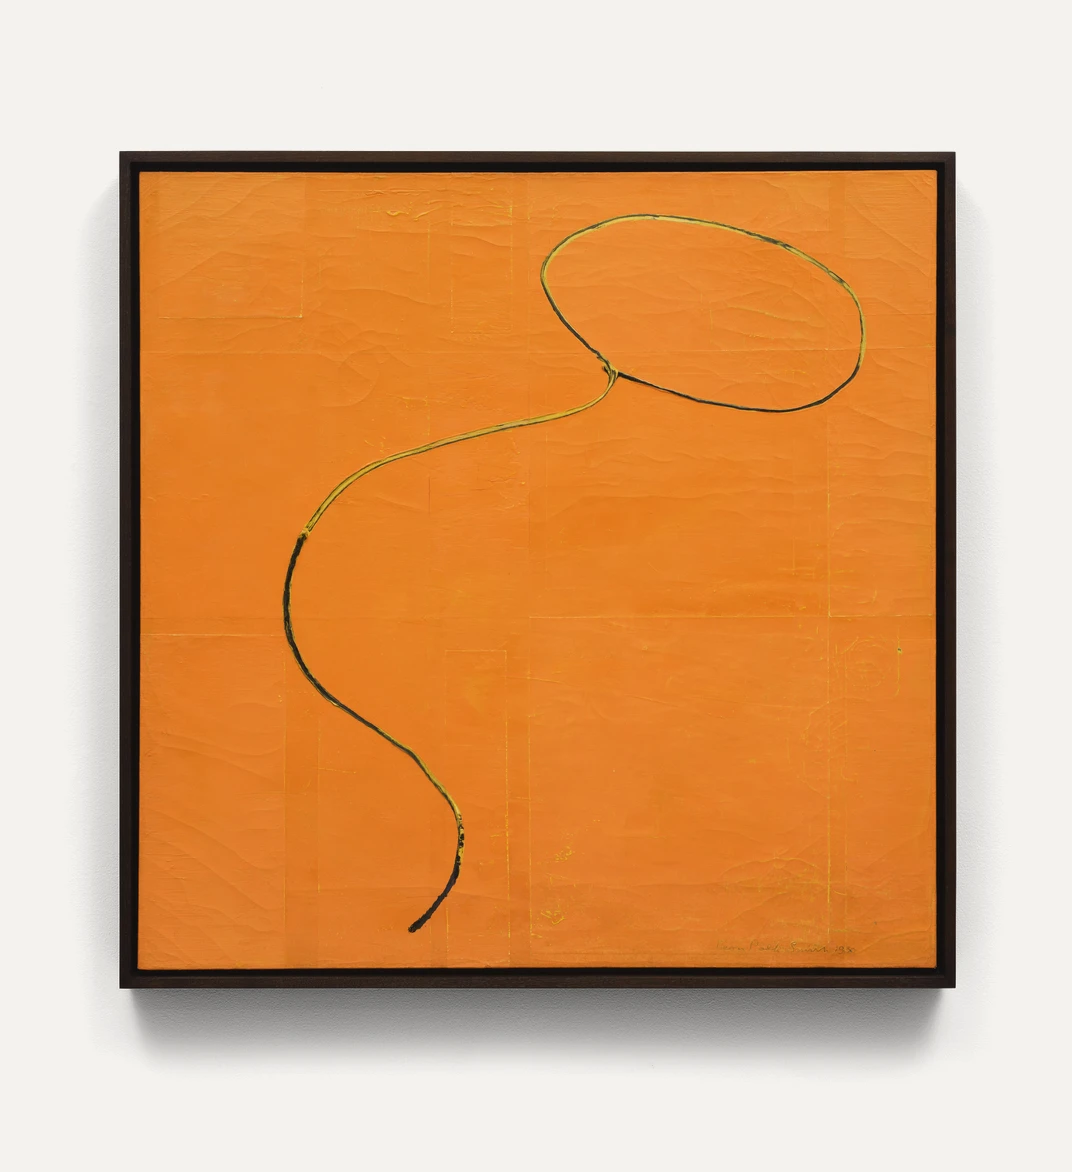 Lariat, 1938. Paint on canvas. Frame: 36 3/4 x 36 3/4 in.